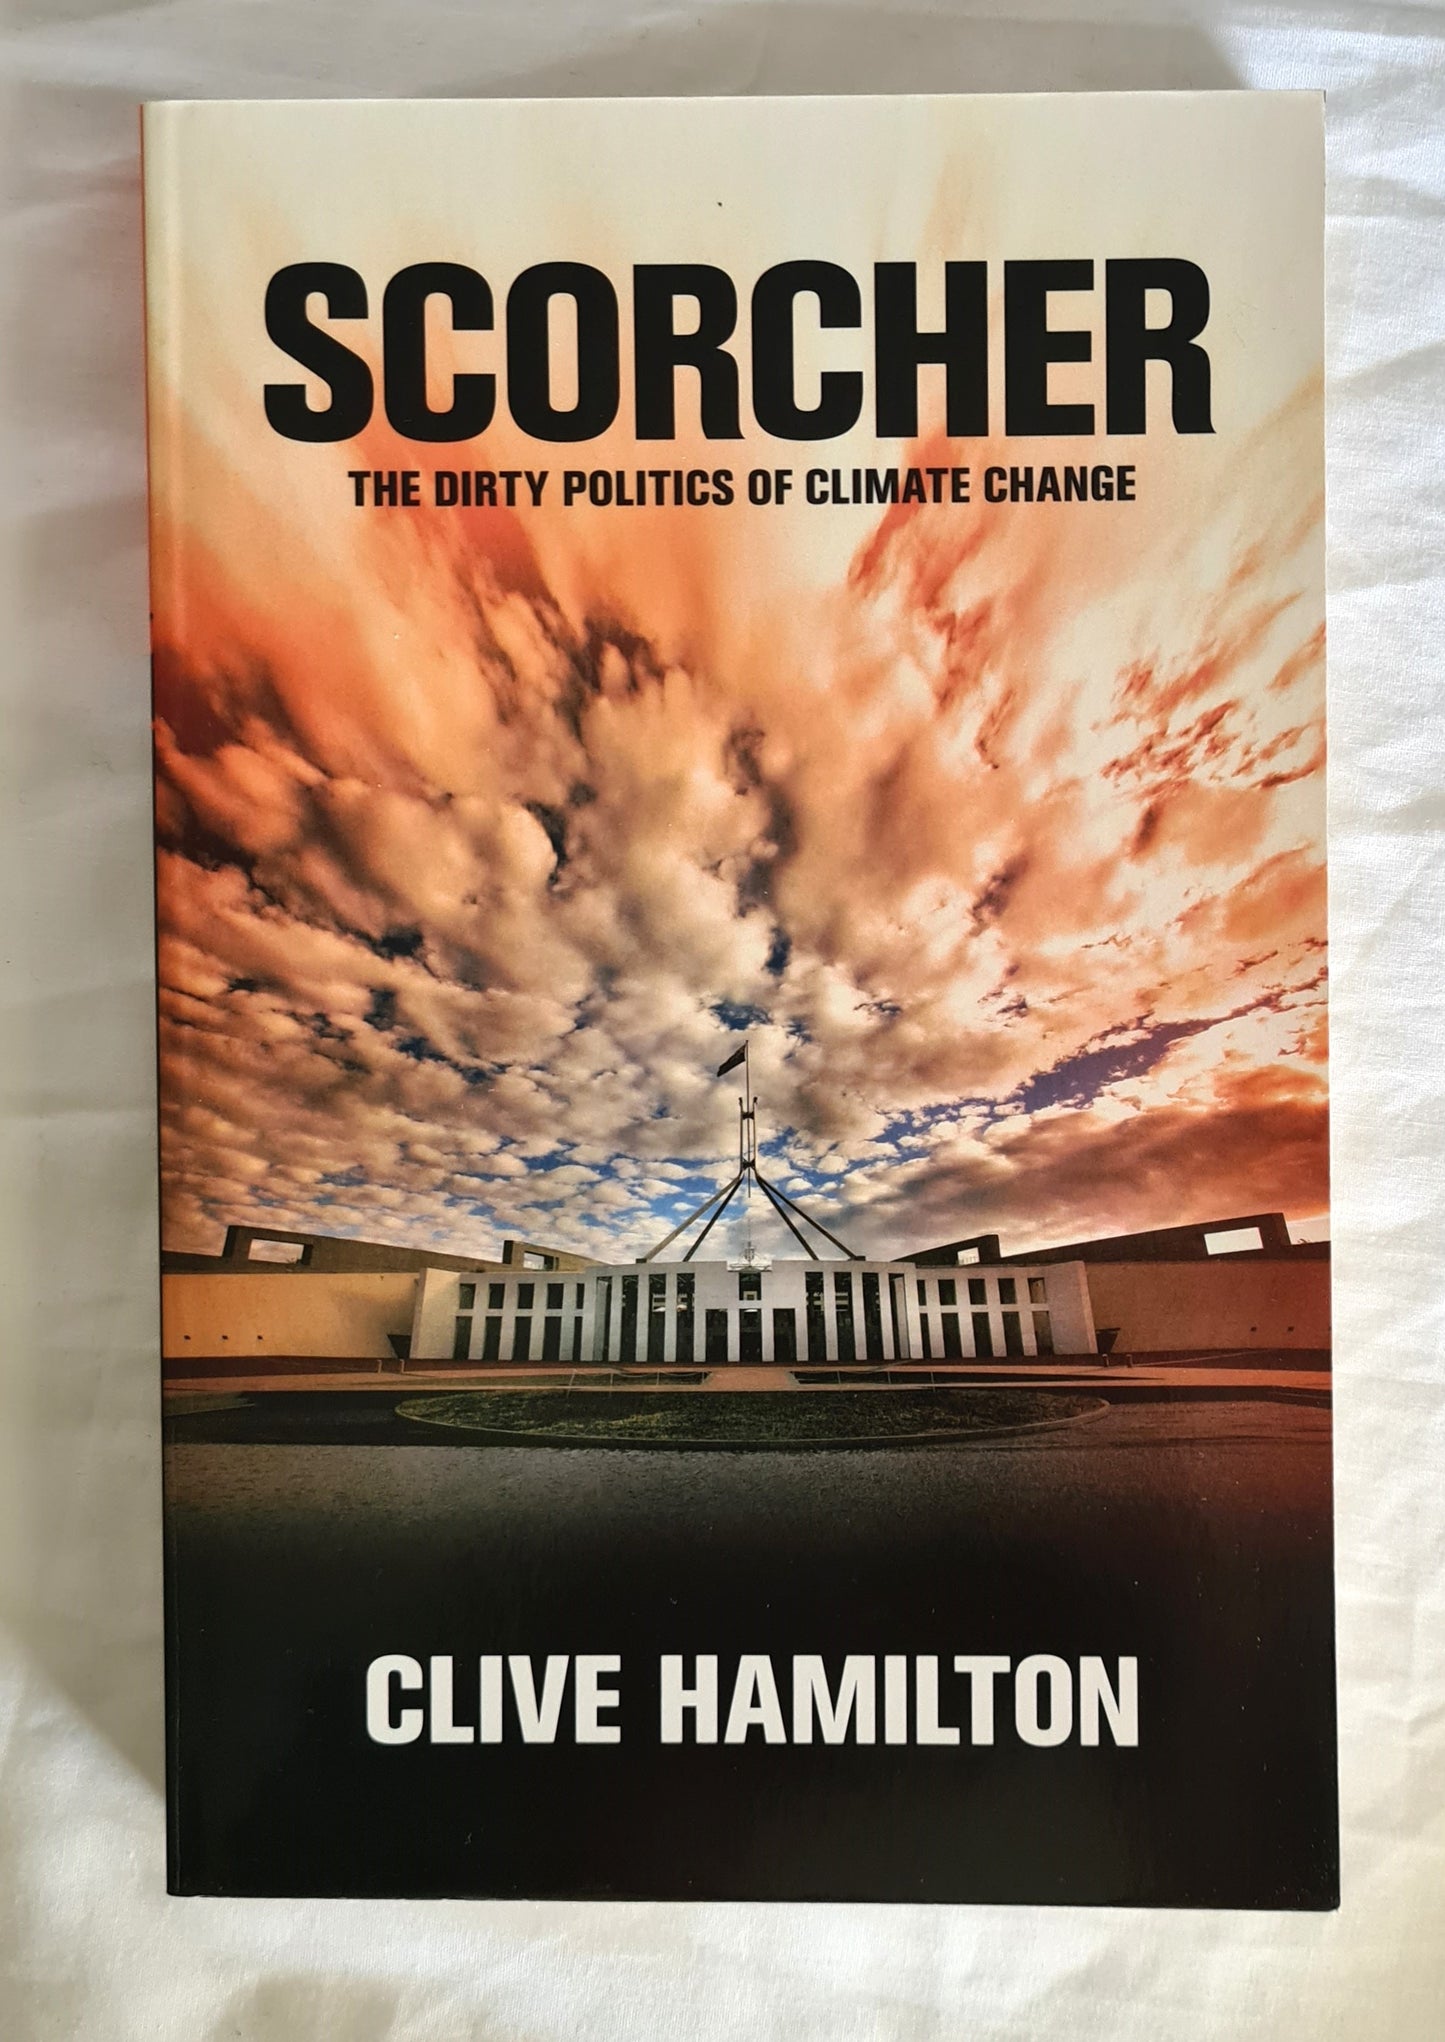 Scorcher  The Dirty Politics of Climate Change  by Clive Hamilton